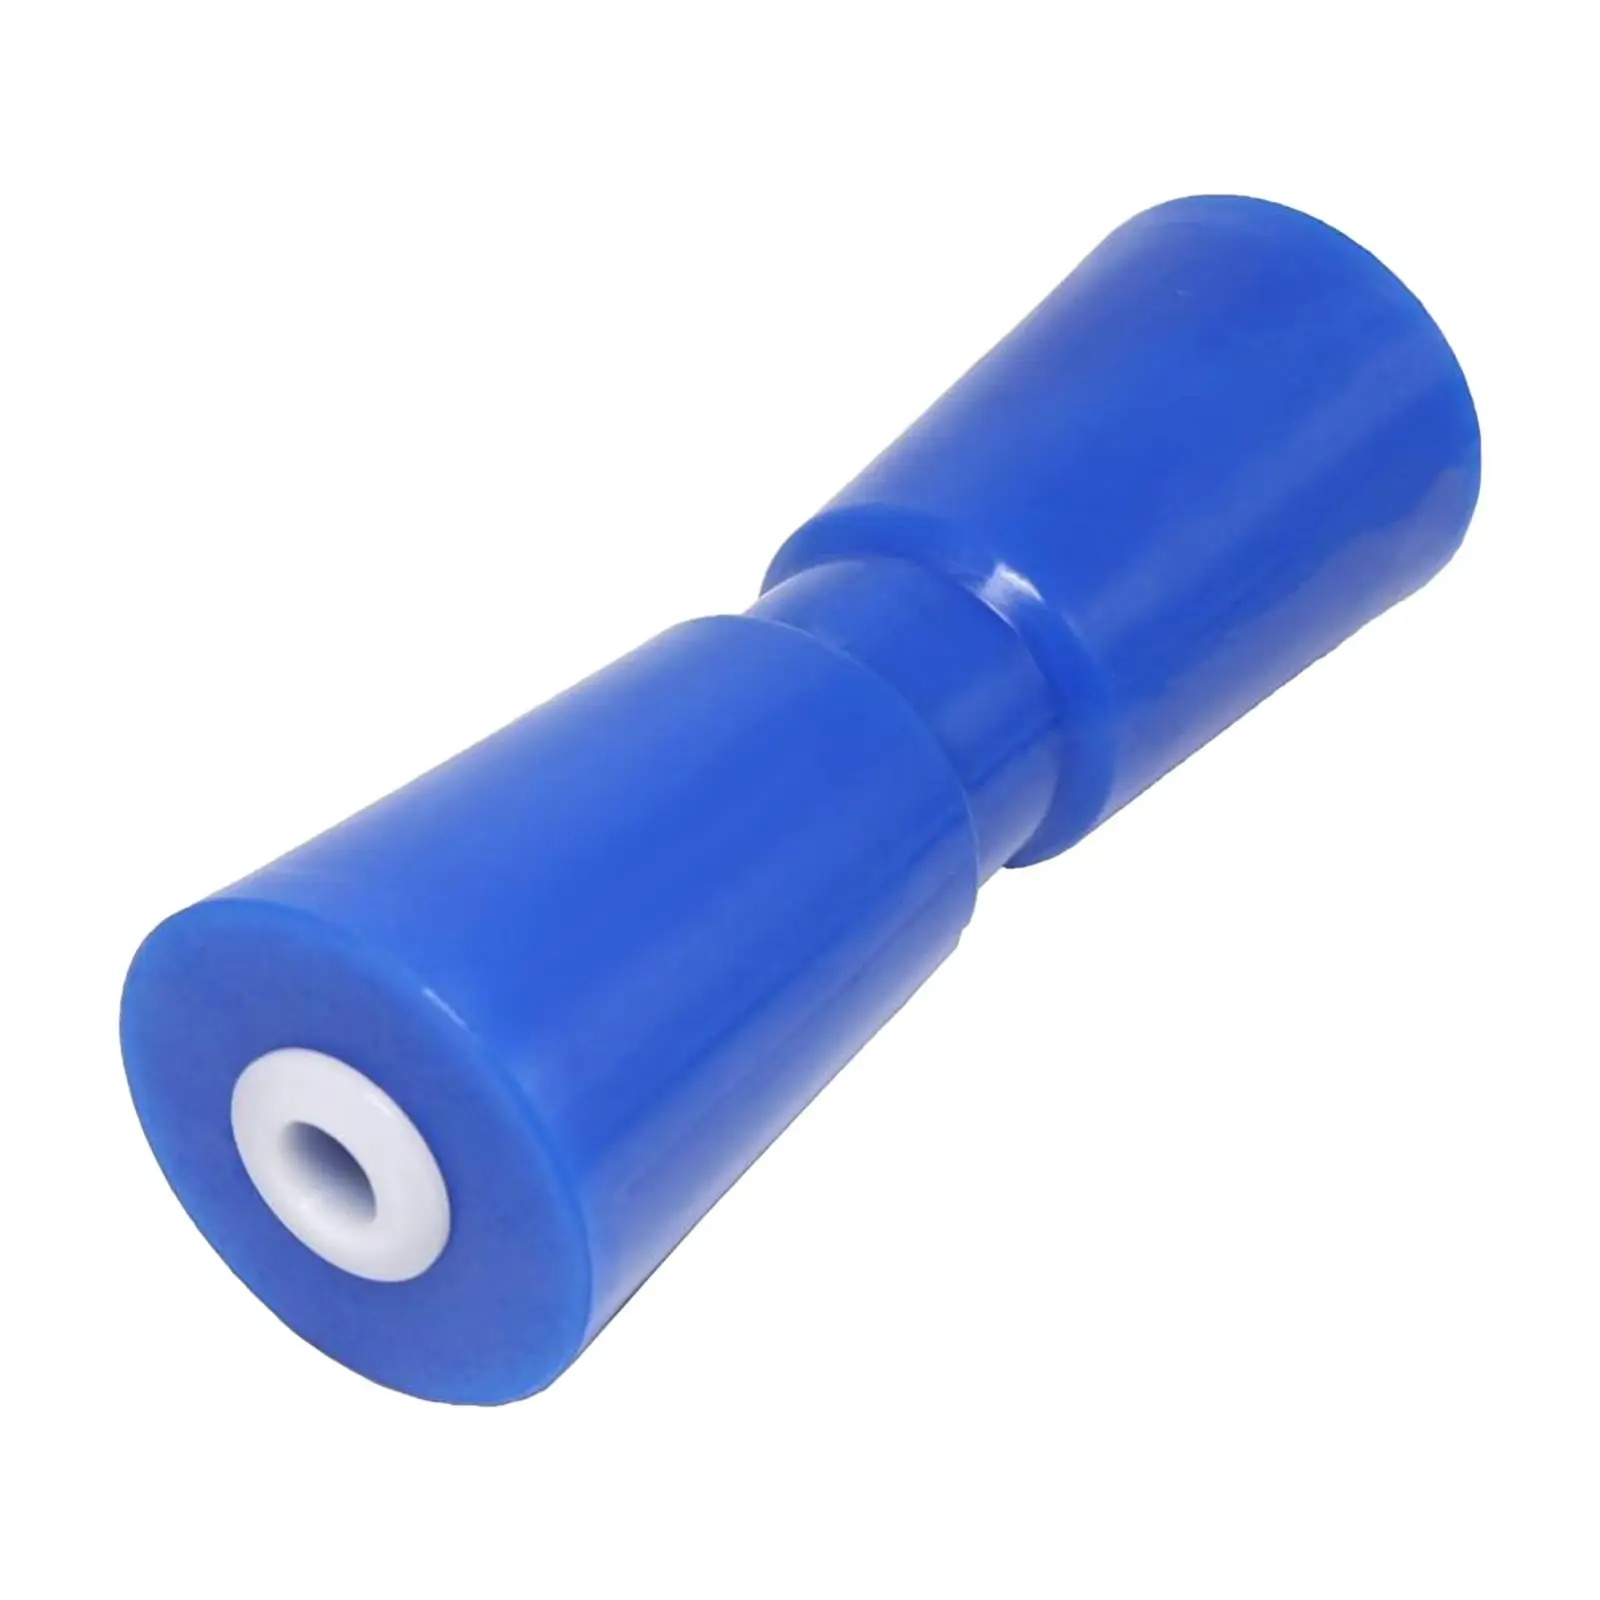 Boat Trailer Roller Bow Stop Components Blue Heavy Duty for Ship Boats